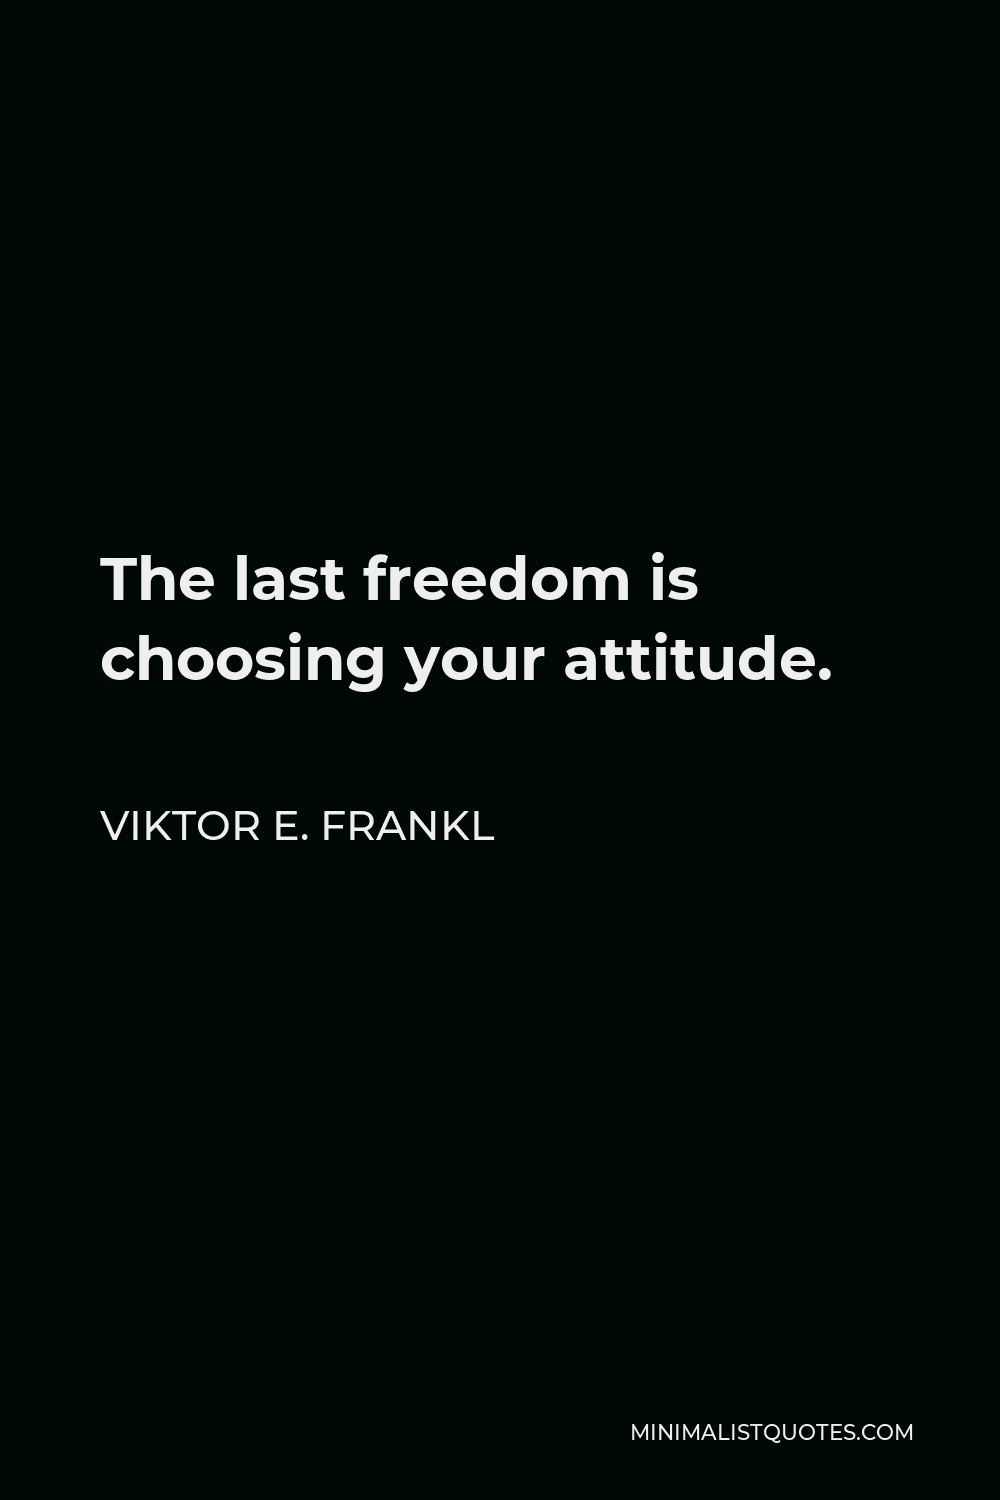 Viktor E. Frankl Quote - The last freedom is choosing your attitude.